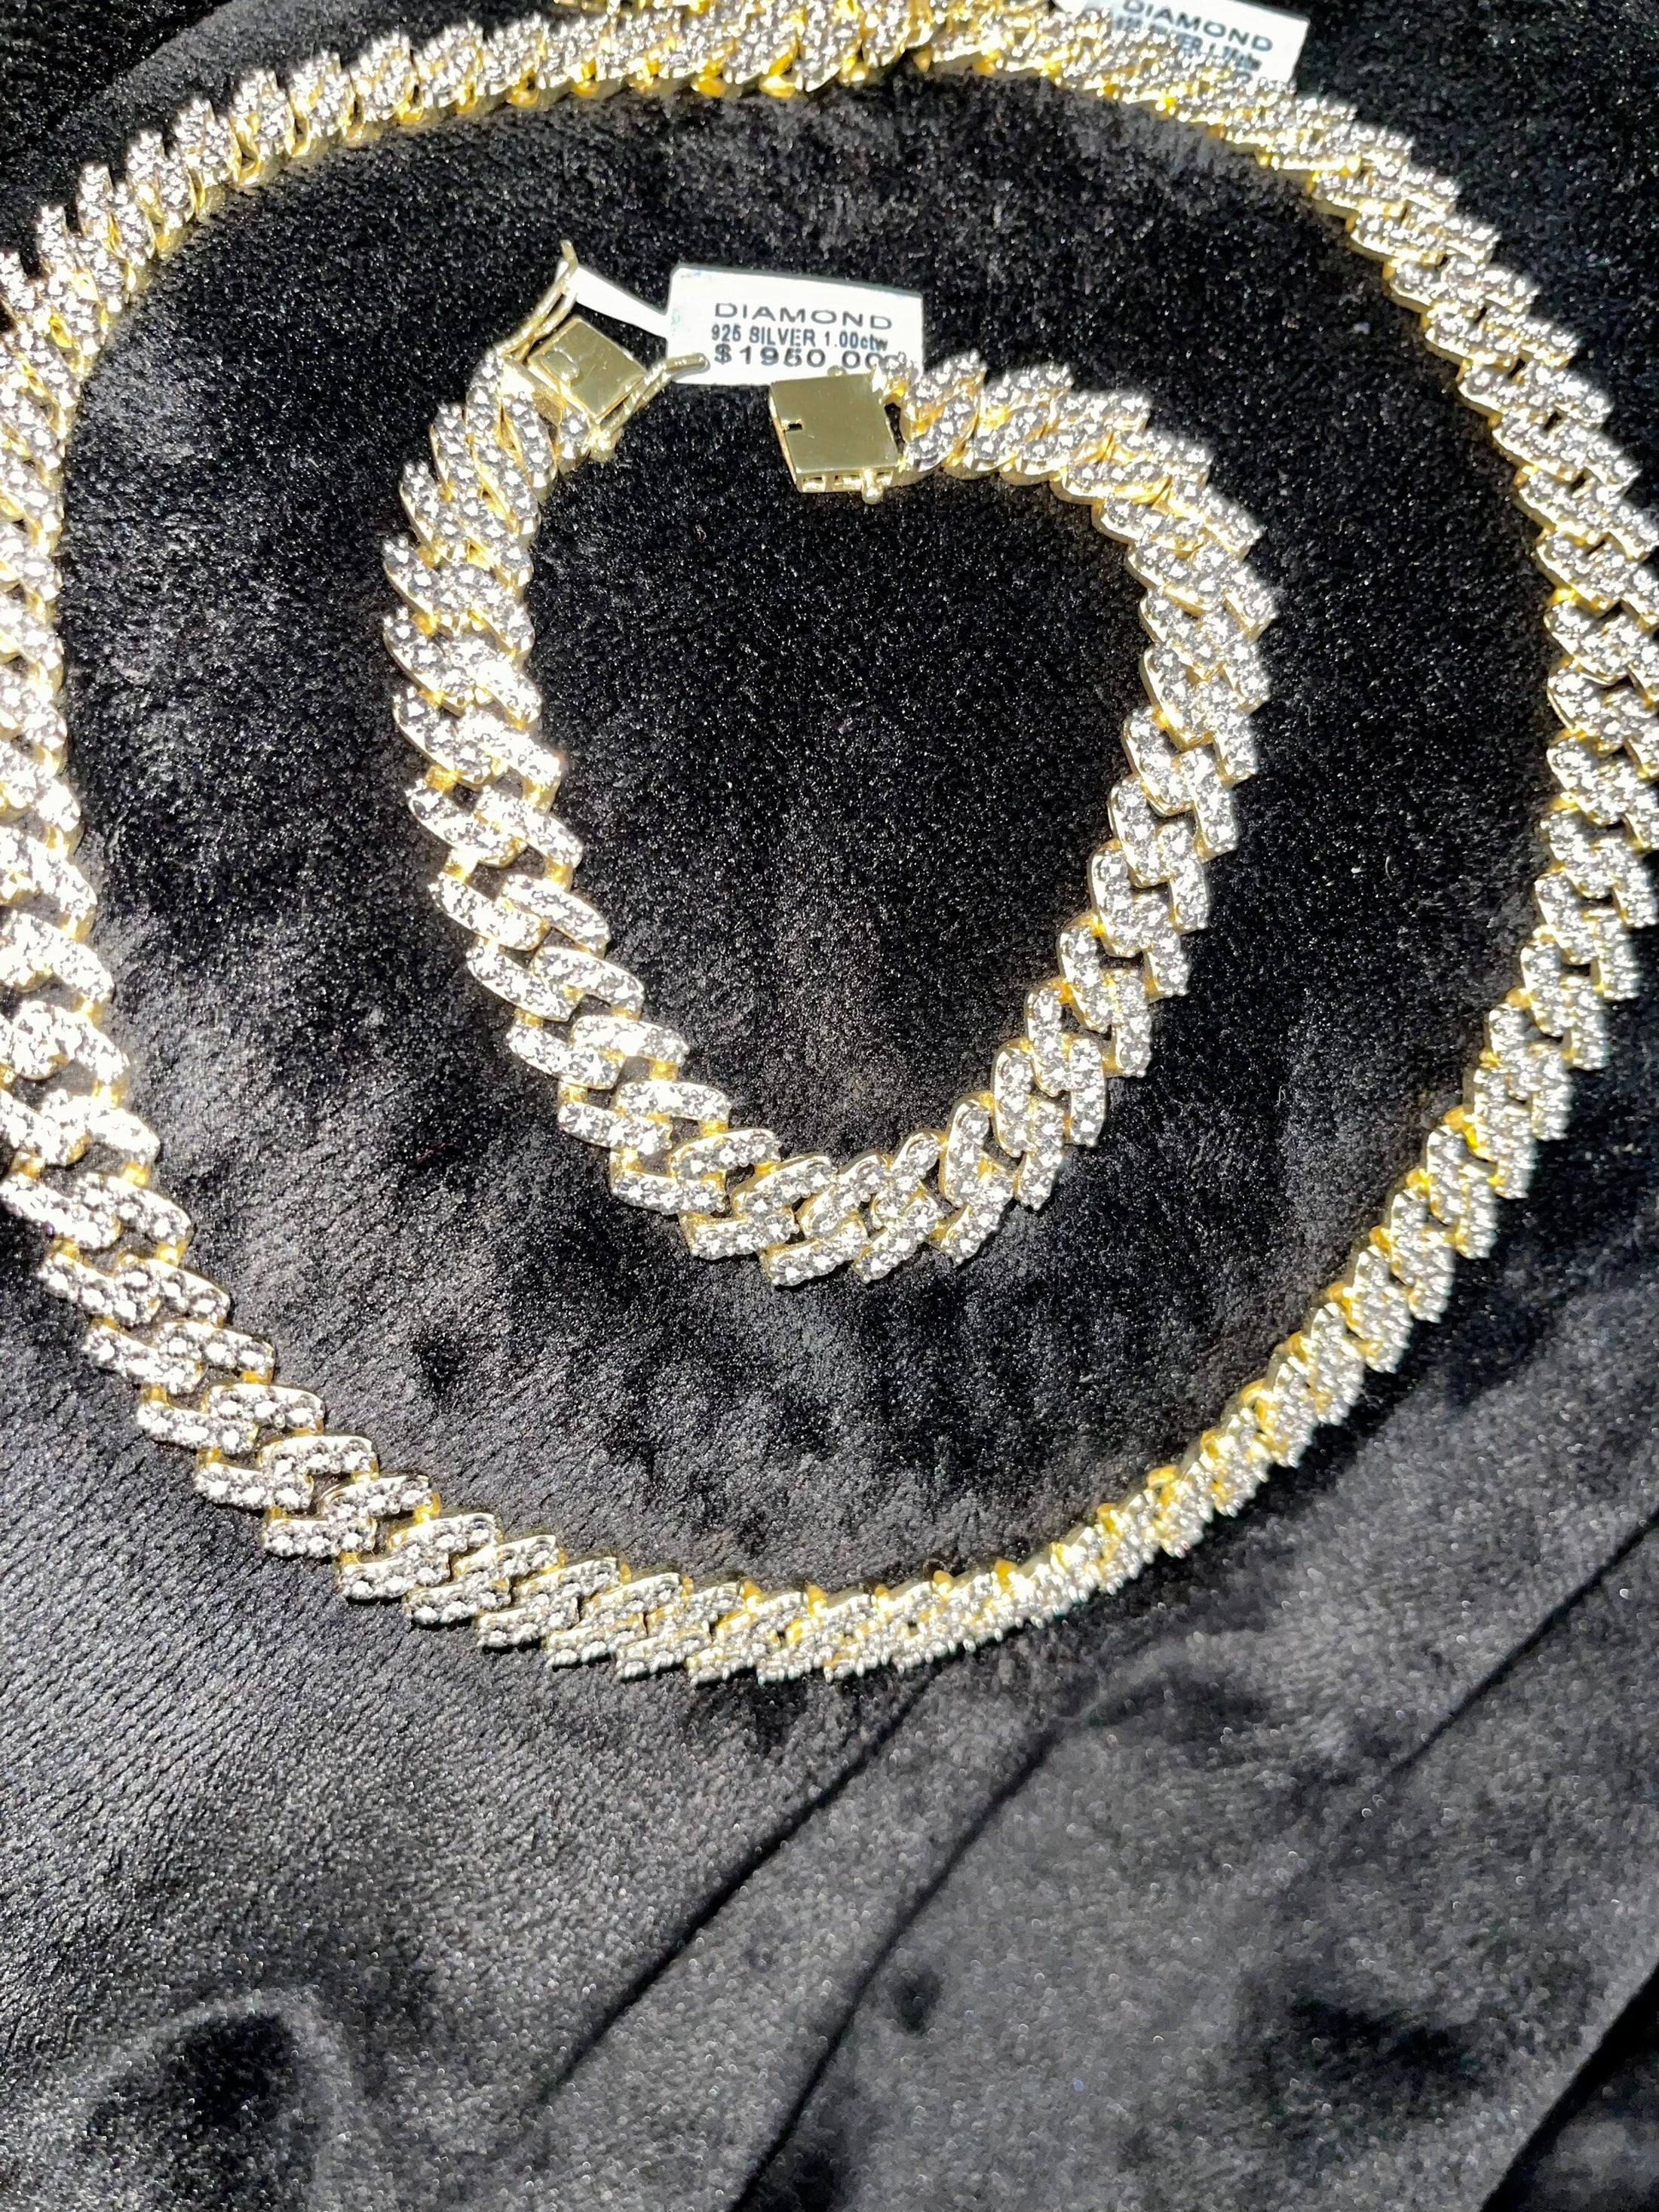 Real diamond Cuban link solid chain not cz not moissanite matching bracelet custom made 3ct natural diamond gift packaging and certified